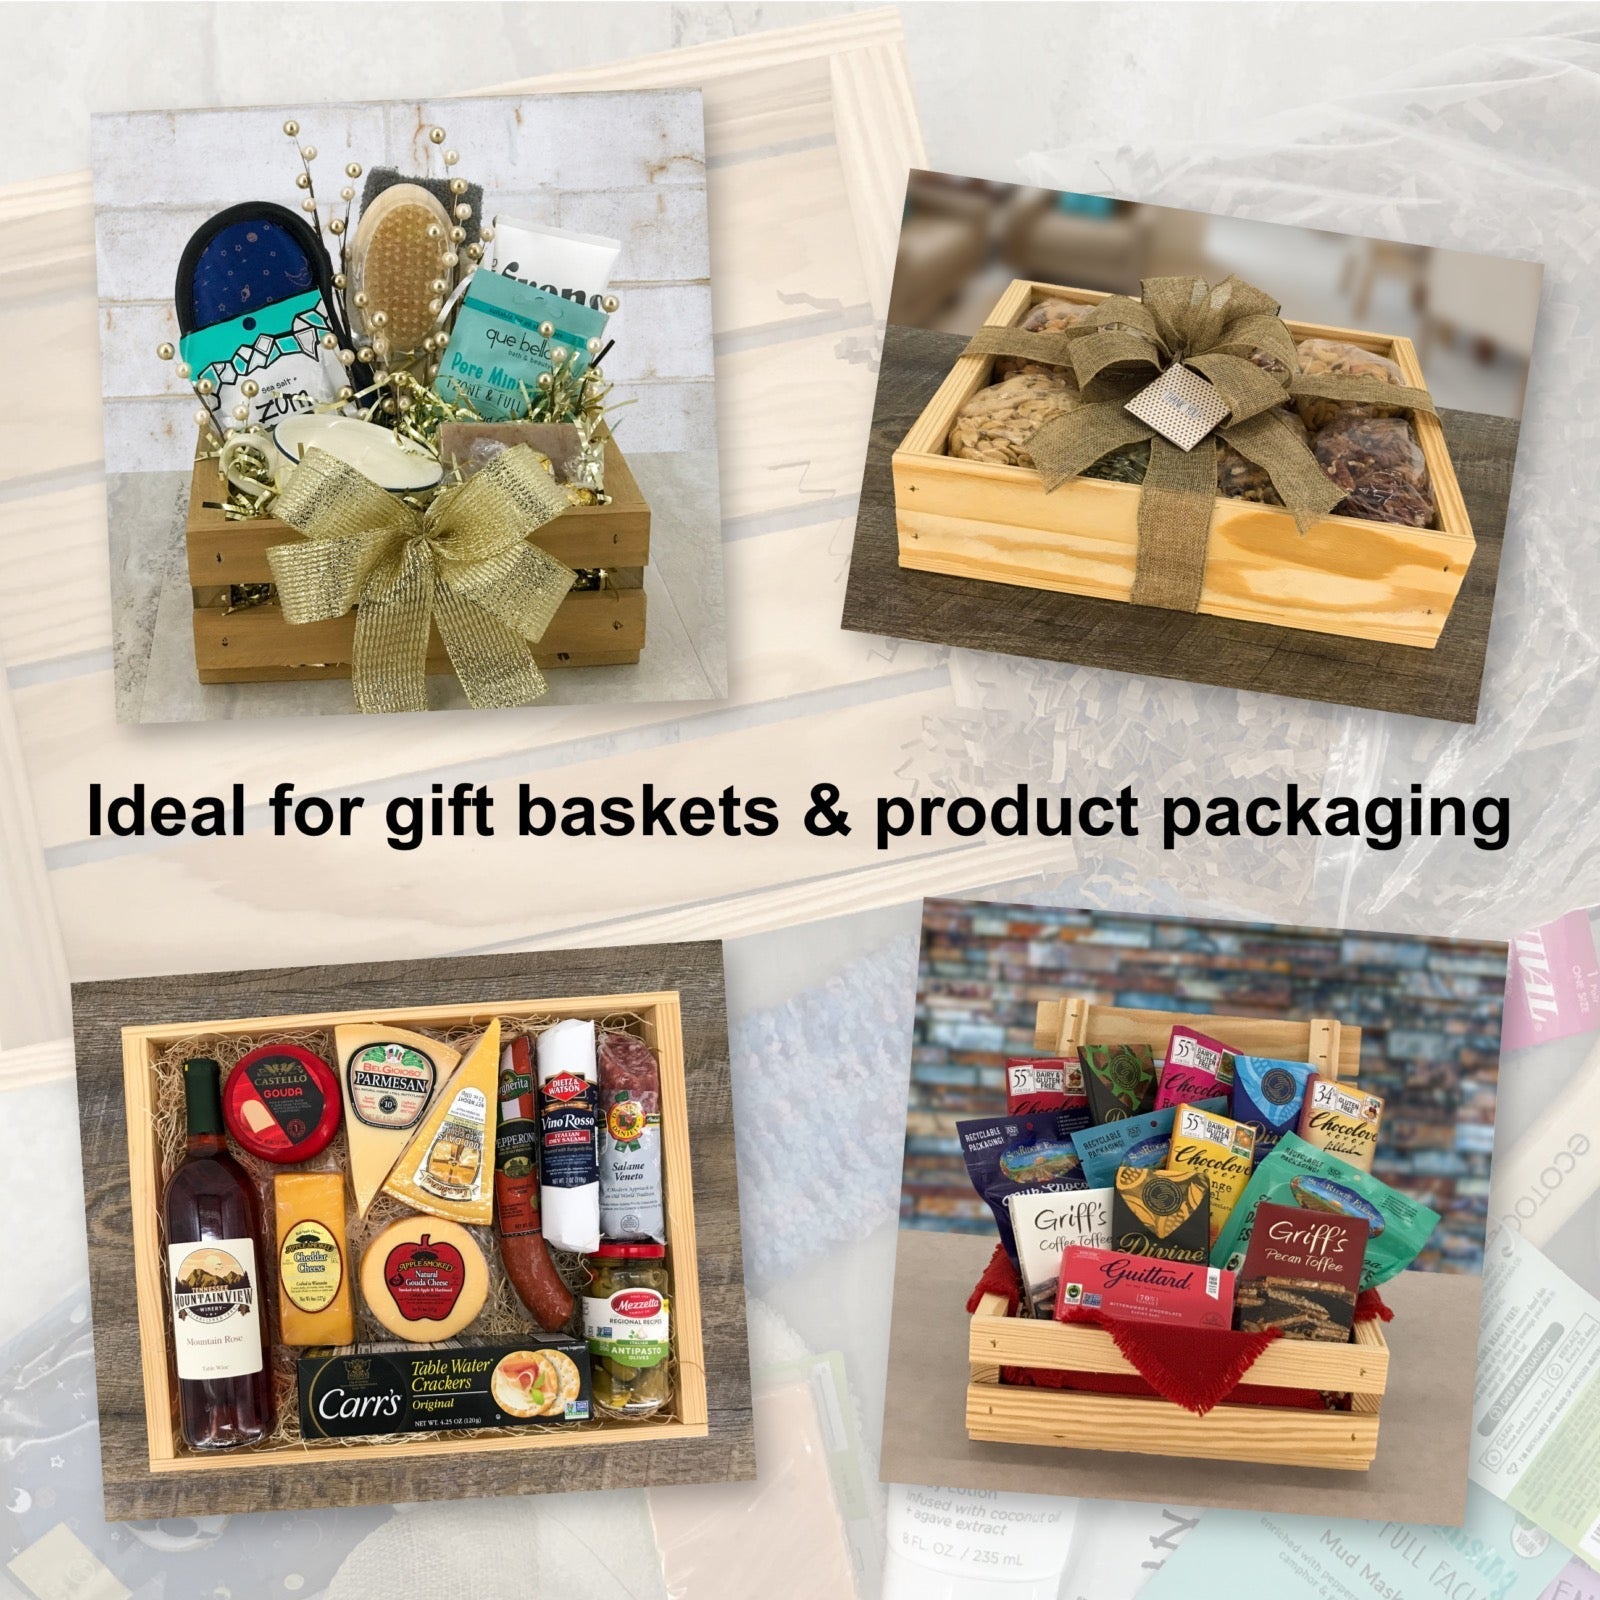 Ideal for gift baskets and product packaging, B2-10.375-7.875-4.3125-ST-NW-NL, 6-B2-10.375-7.875-4.3125-ST-NW-NL, 12-B2-10.375-7.875-4.3125-ST-NW-NL, 24-B2-10.375-7.875-4.3125-ST-NW-NL, 48-B2-10.375-7.875-4.3125-ST-NW-NL, 96-B2-10.375-7.875-4.3125-ST-NW-NL